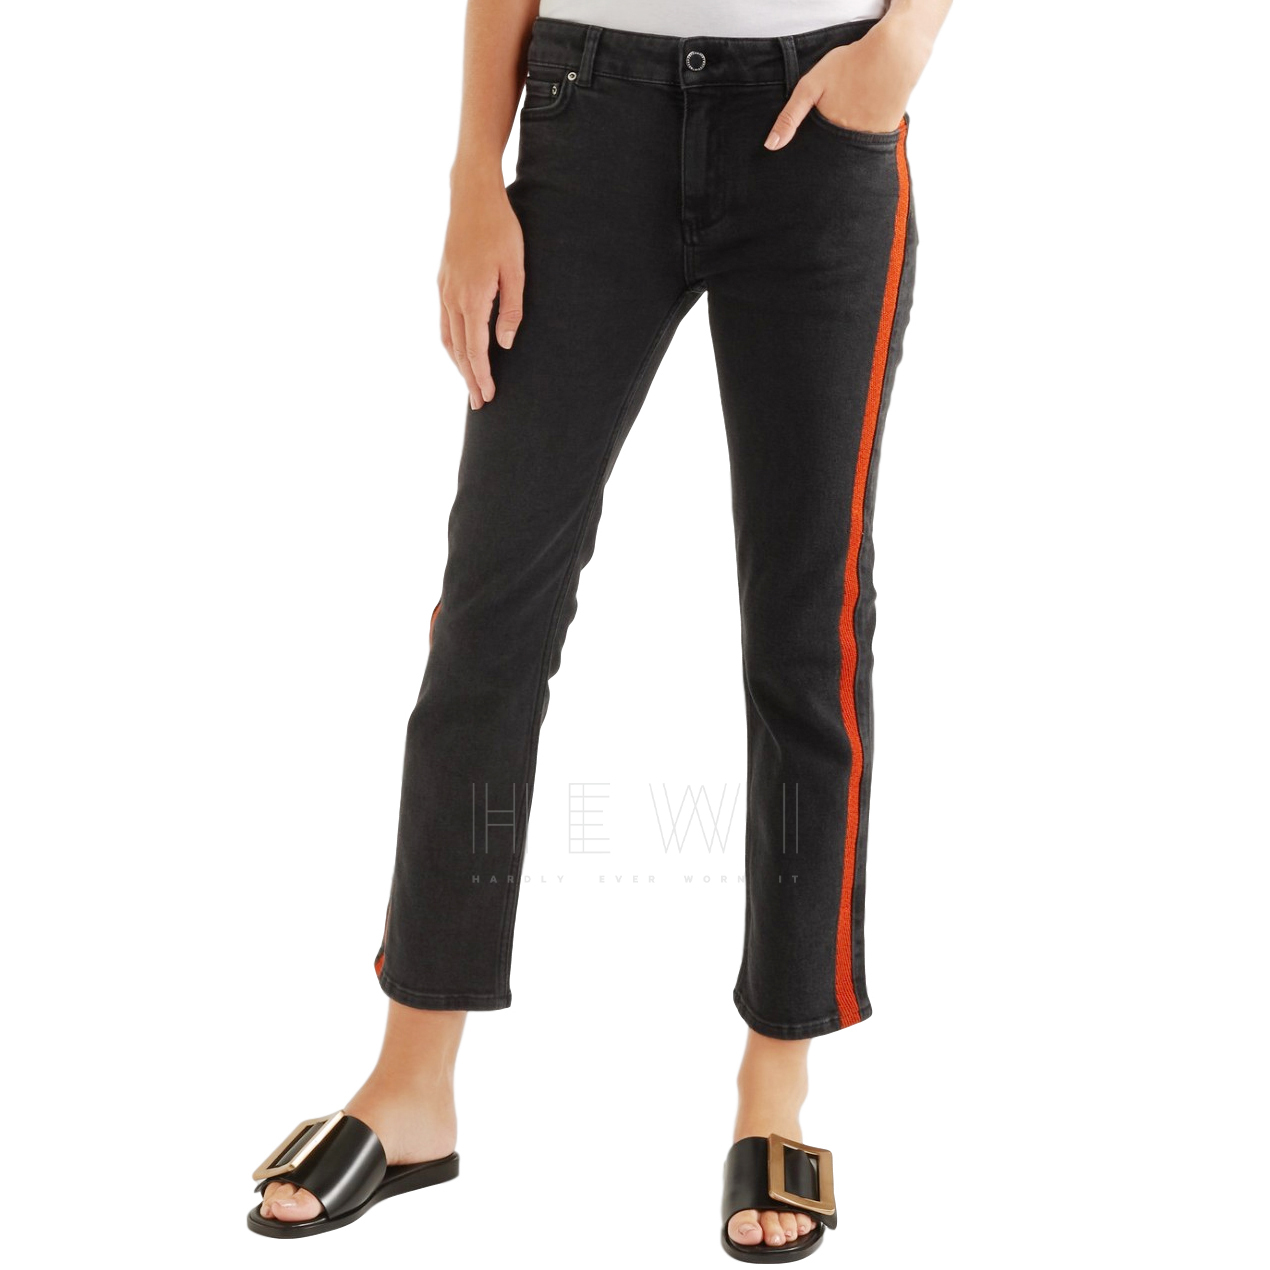 jeans with red side stripe